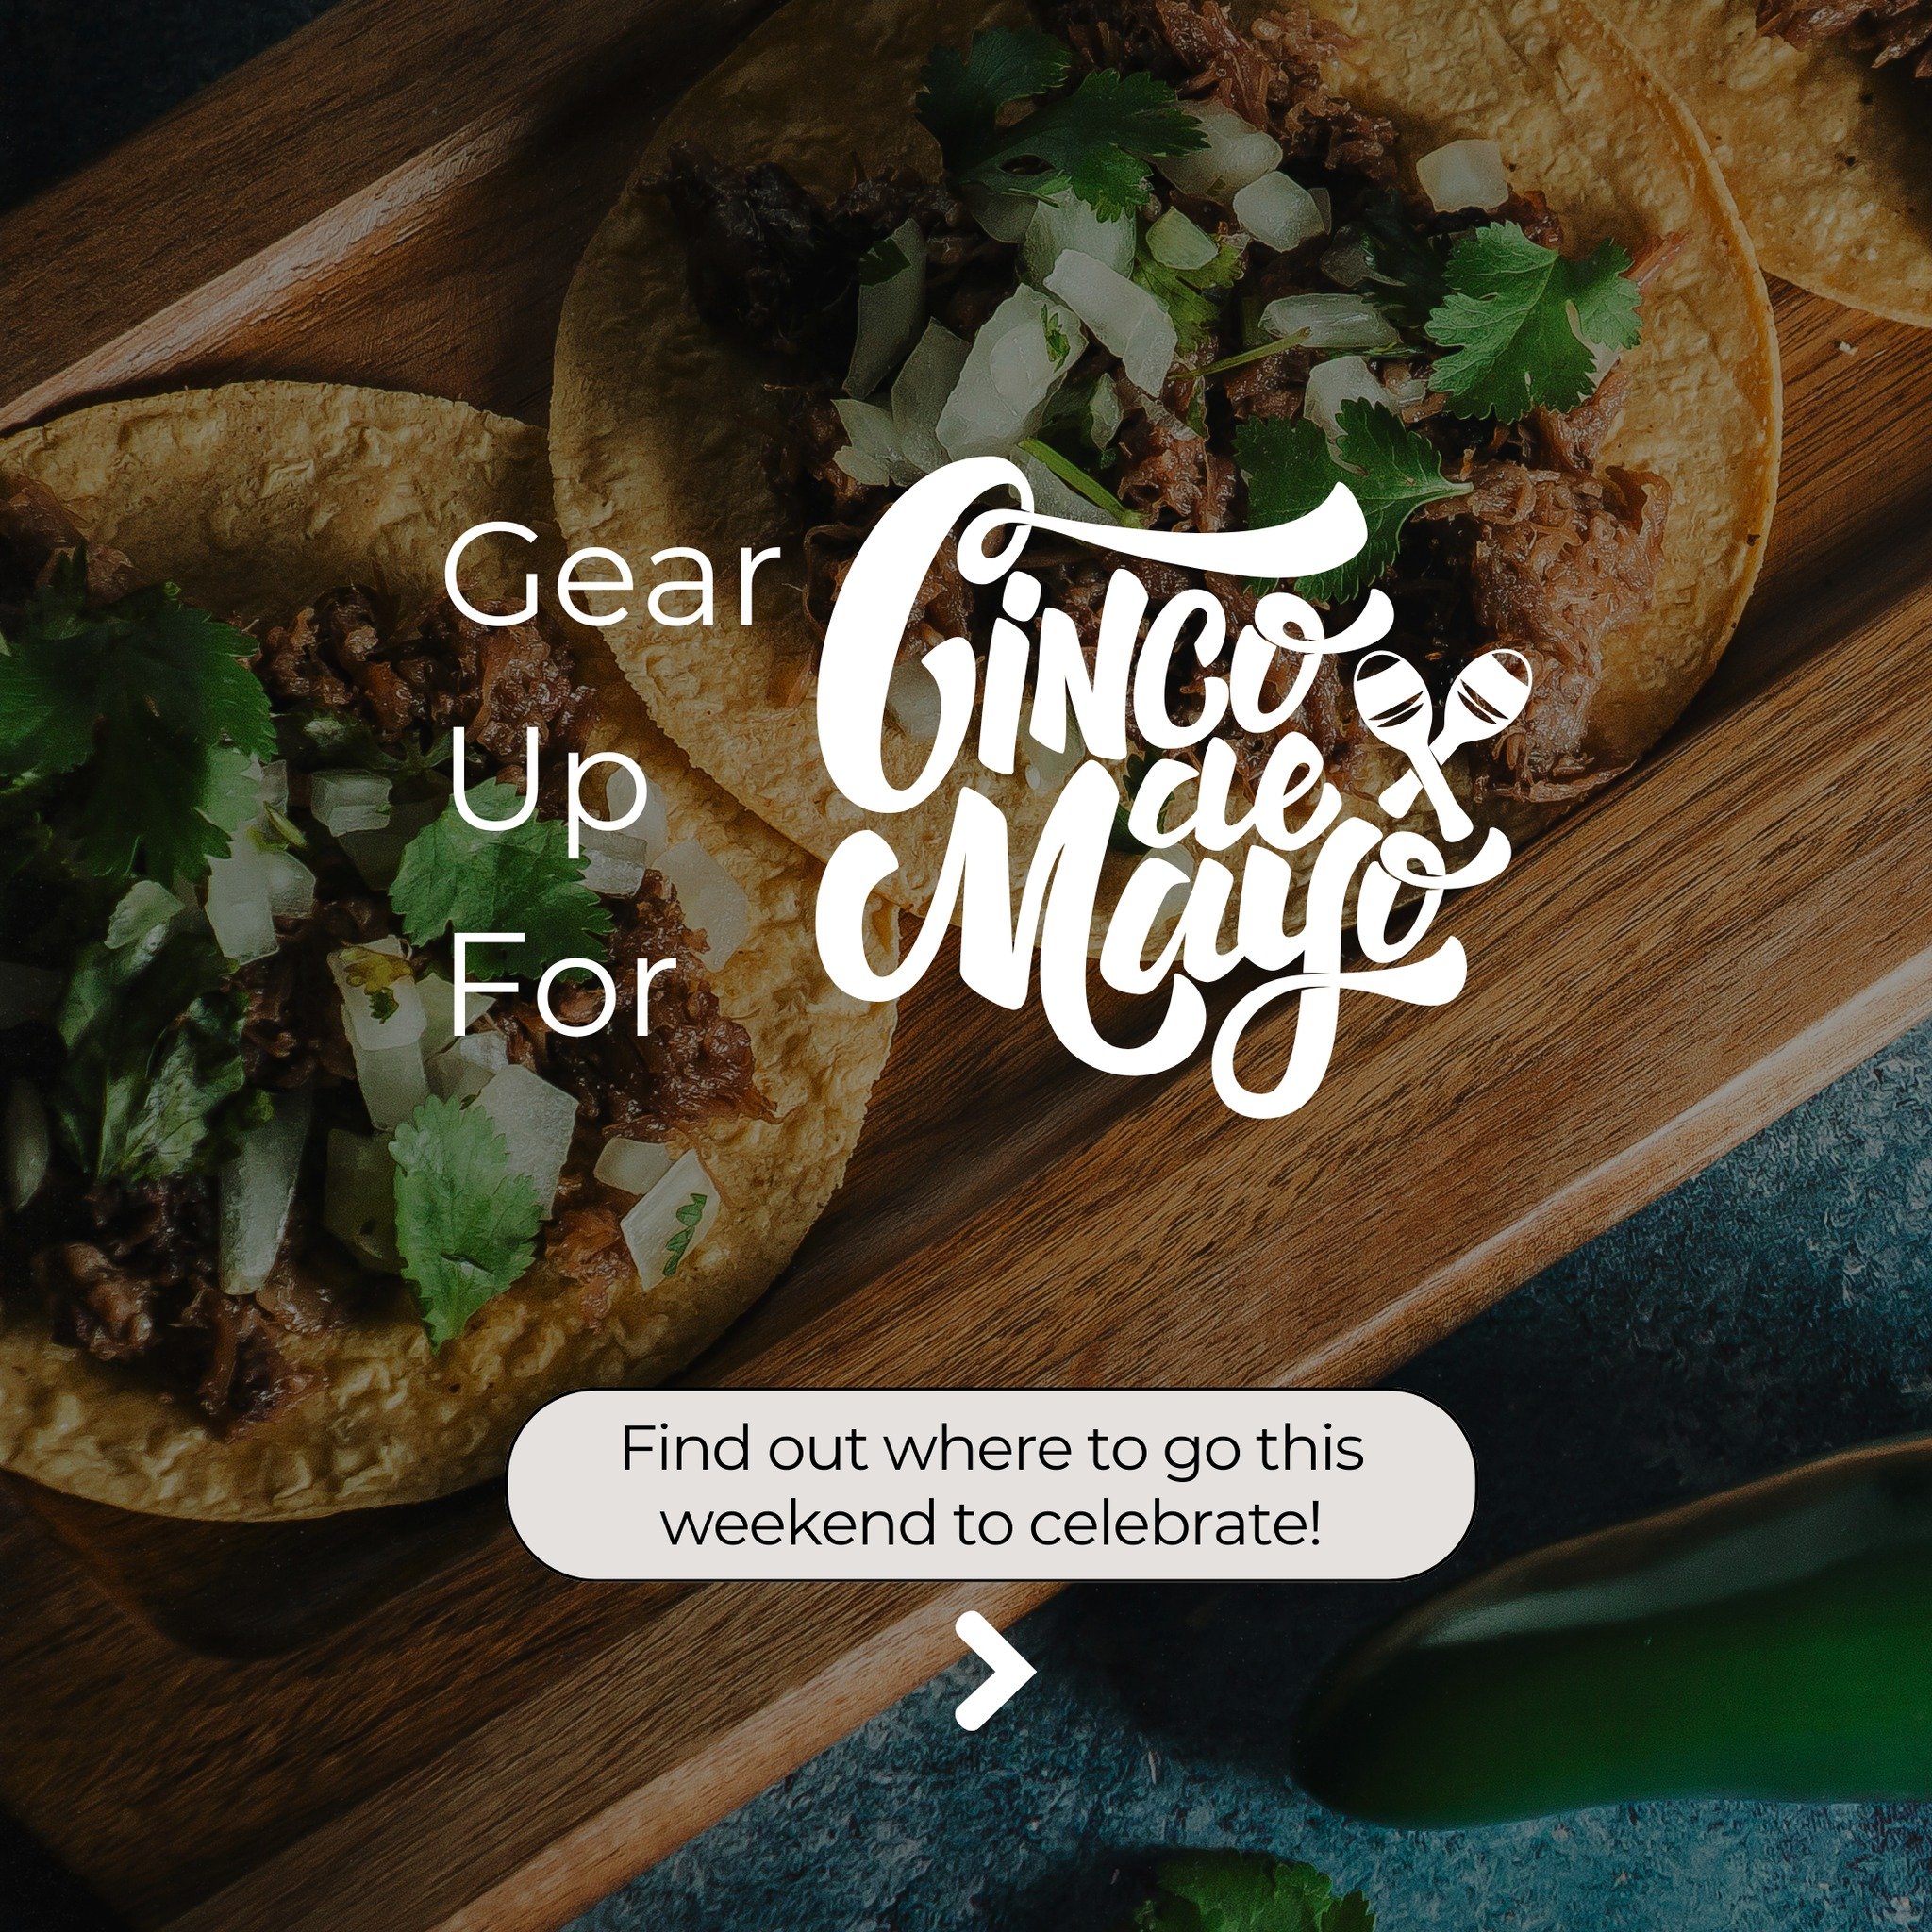 🎉🌮 Get ready for a Cinco de Mayo celebration like no other! 🌟 Mark your calendars for May 4th because we've got your ultimate guide to the festivities happening in Medicine Hat! 🎉 Here's your roadmap to the best Cinco de Mayo fun in town:

🎈 Cas